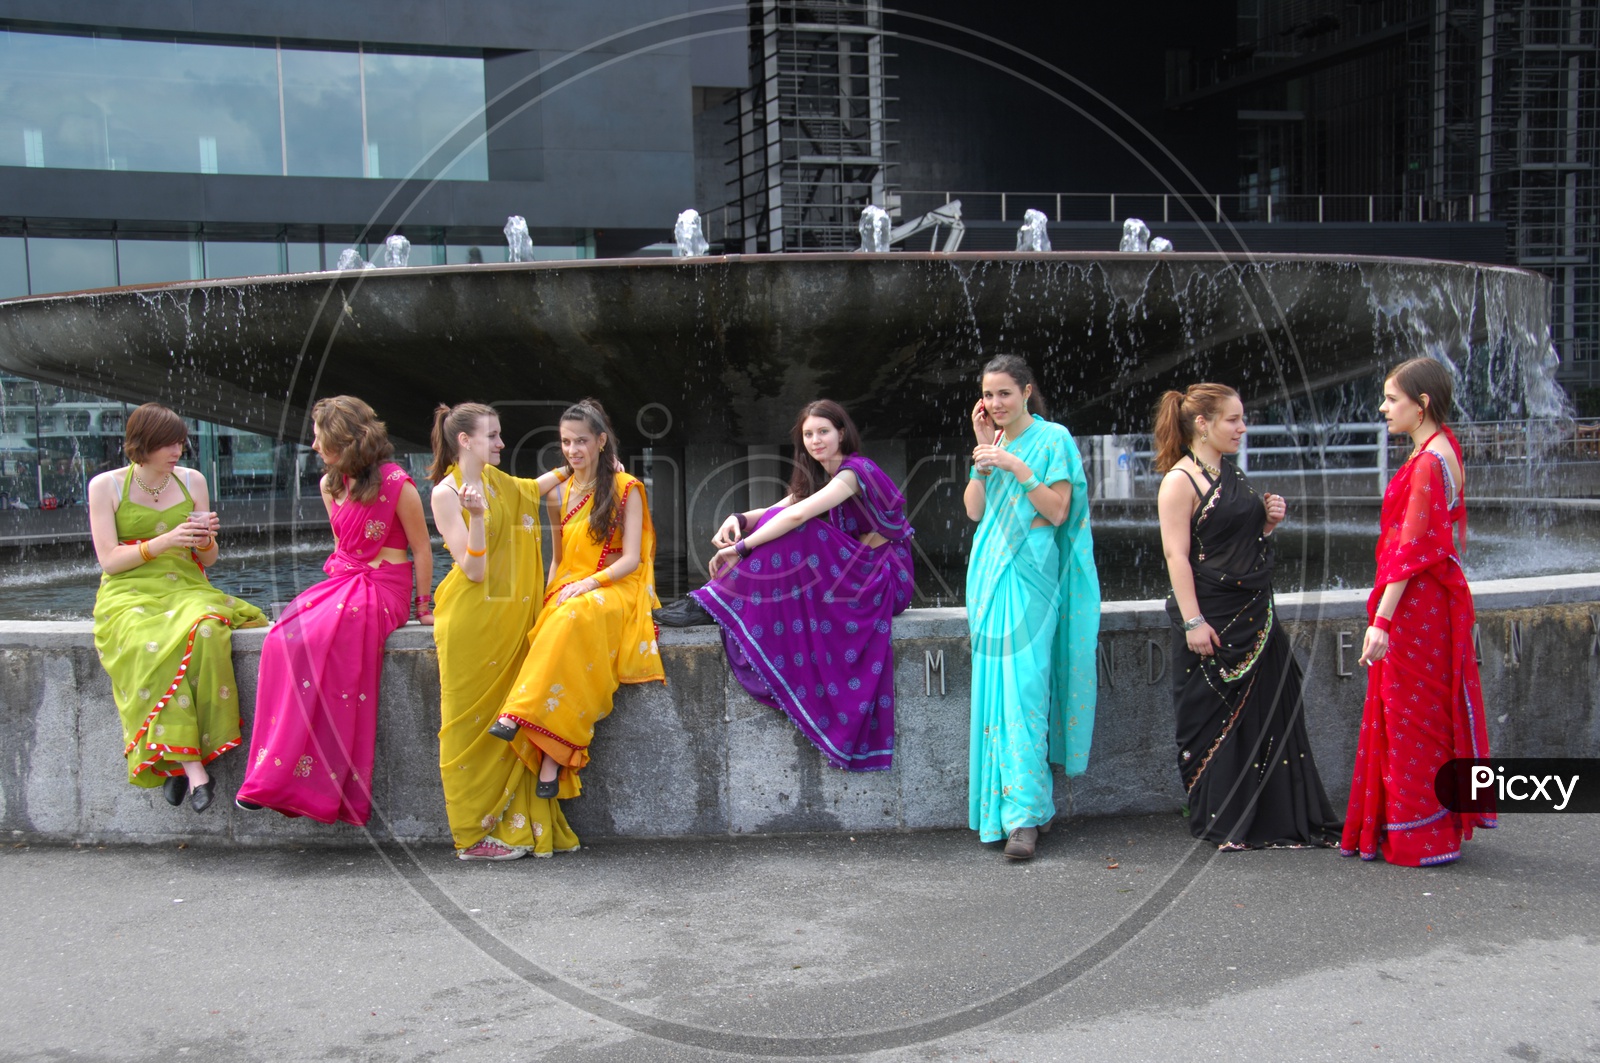 Foreign Woman Wearing Sarees